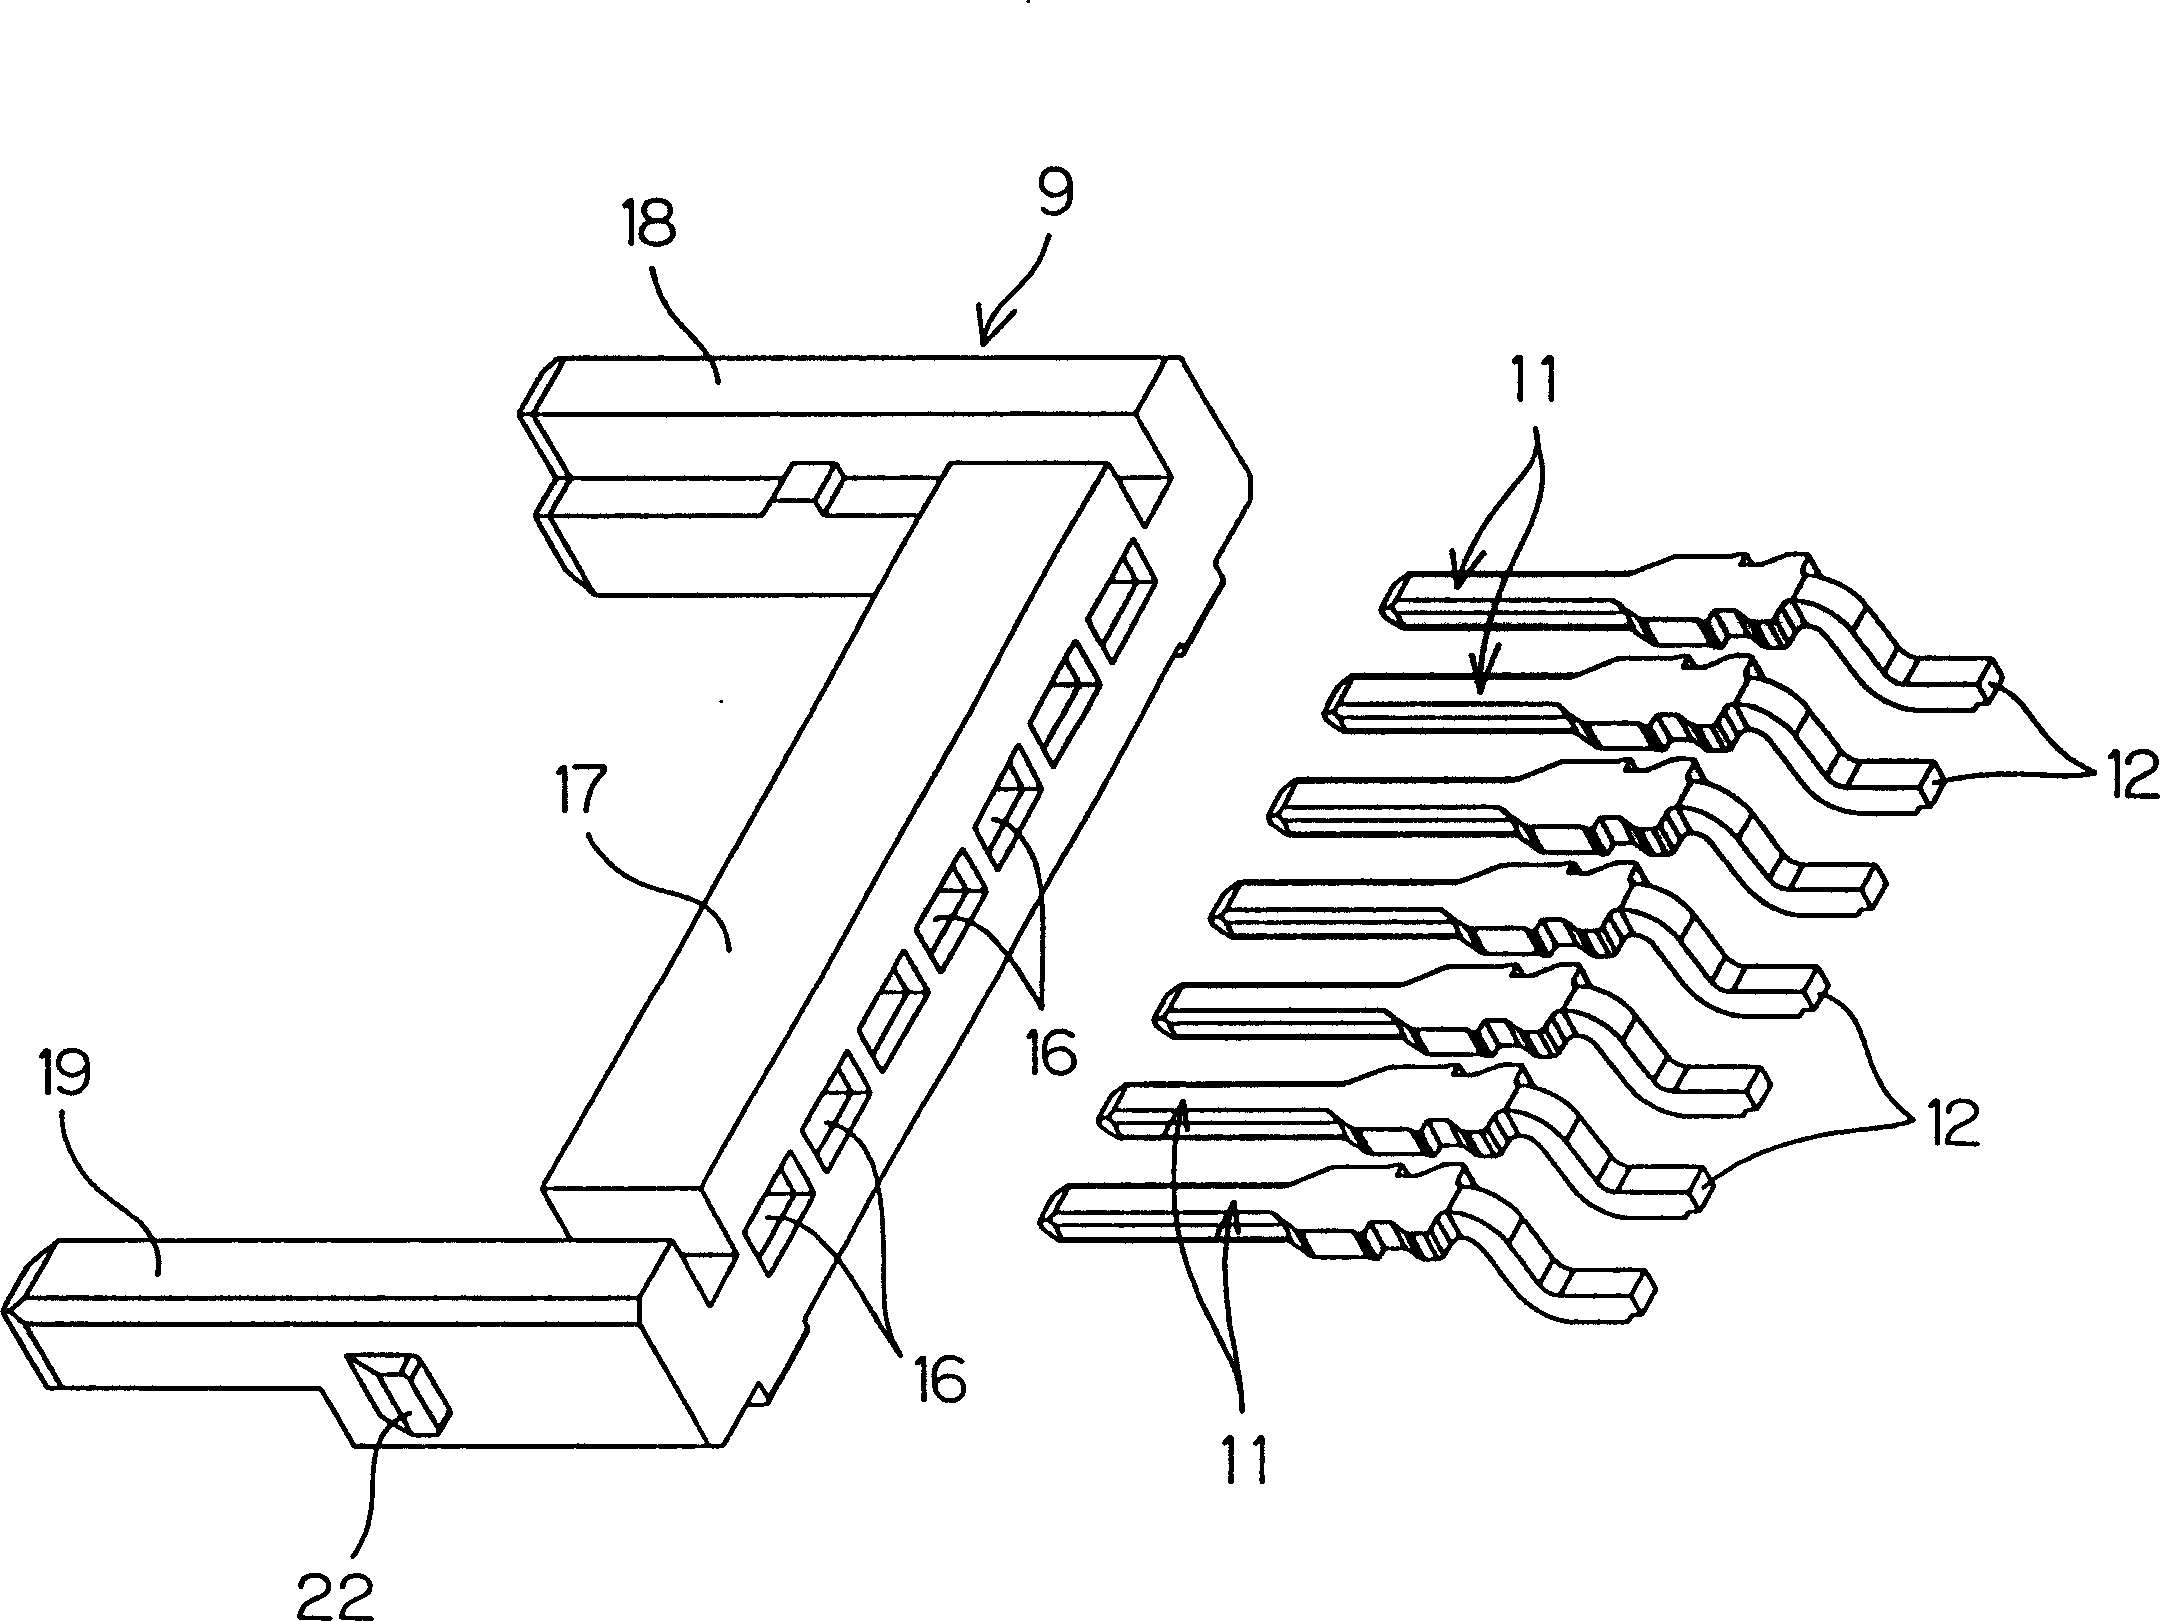 Connector for printed wiring board